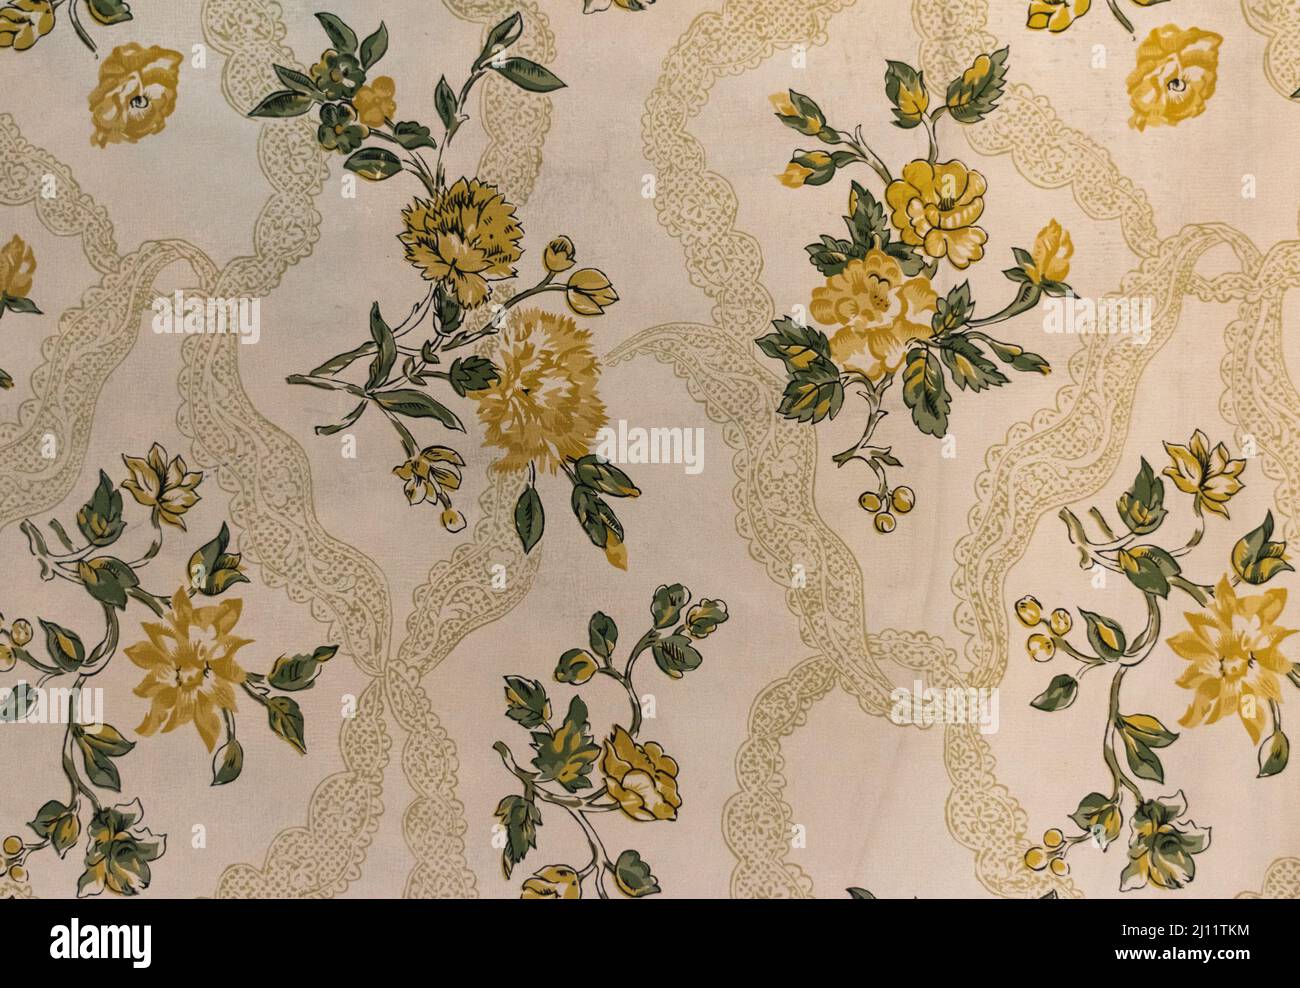 Antique floral wallpaper with yellow flowers from inside the Riordan Mansion in Flagstaff, Arizona, U.S.A. Stock Photo